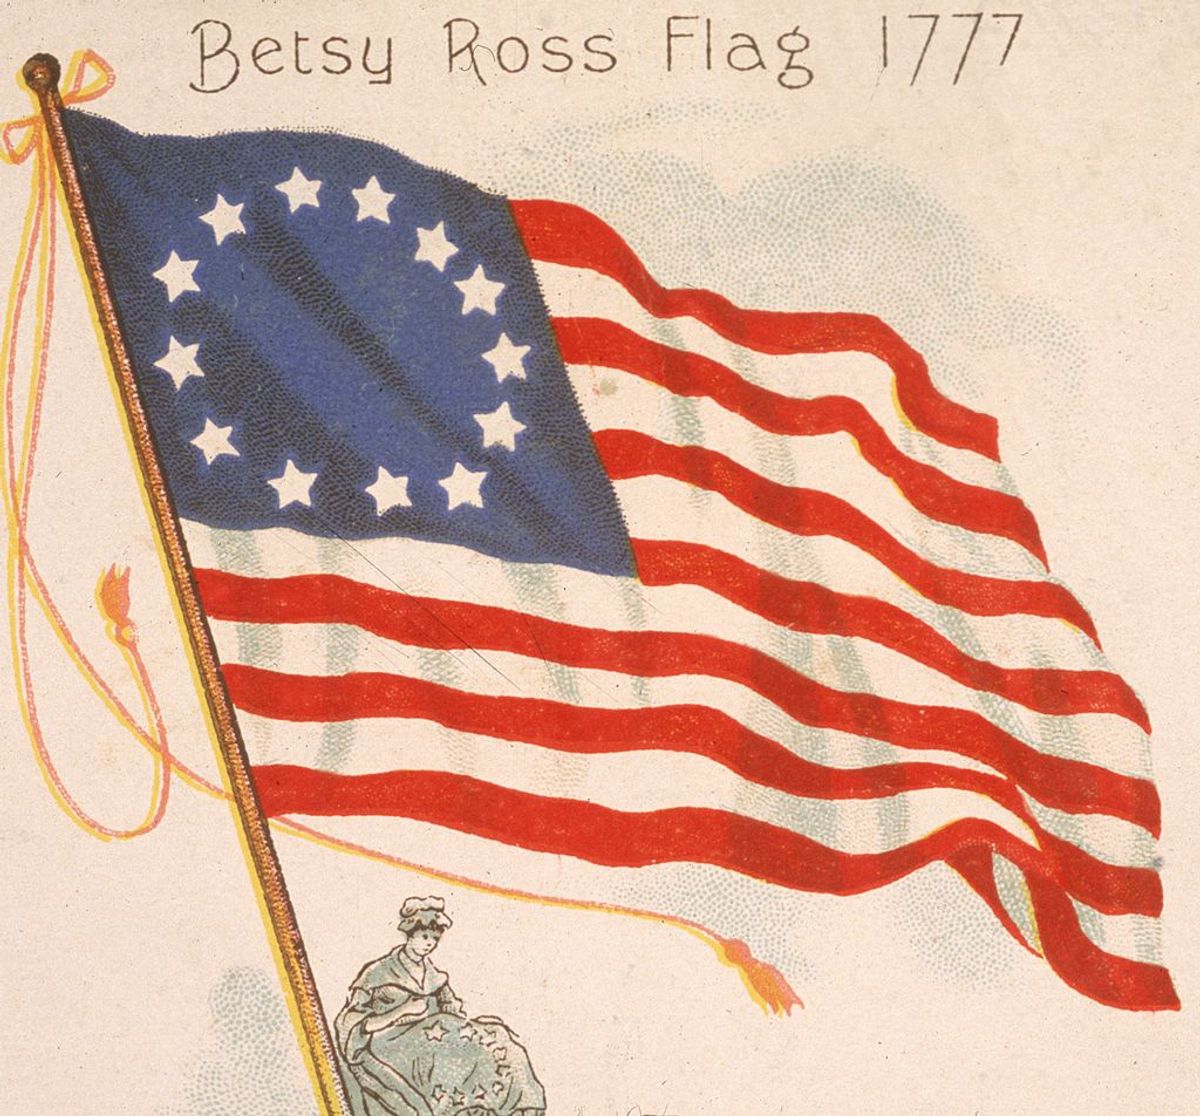 1777:  American seamstress Betsy Ross (1752 - 1836) sews an American flag, the first US flag adopted by Congress and the first used at the Battle of Brandywine, Pennsylvania on September 11, 1777.  (Photo by Hulton Archive/Getty Images) (Kathy Hutchins / Shutterstock.com)